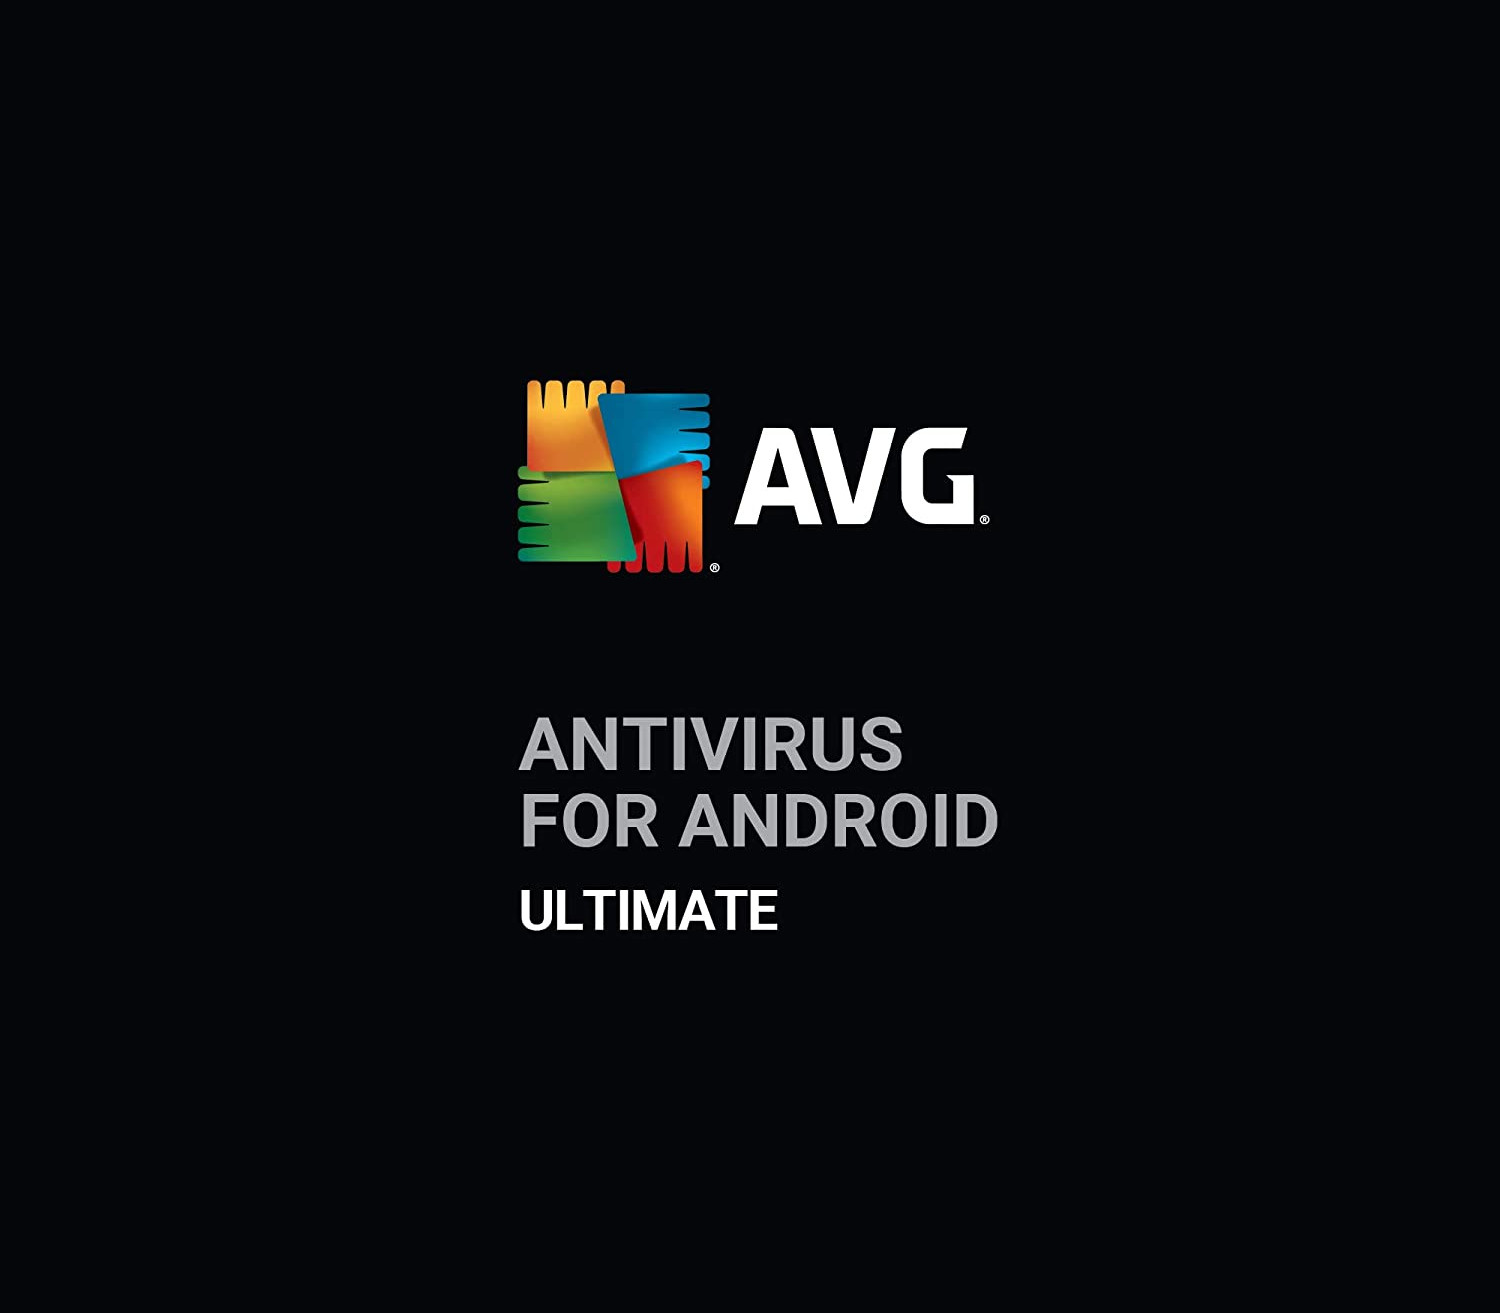 AVG Antivirus for Android - Ultimate Key (1 Year / 1 Device) [$ 6.84]